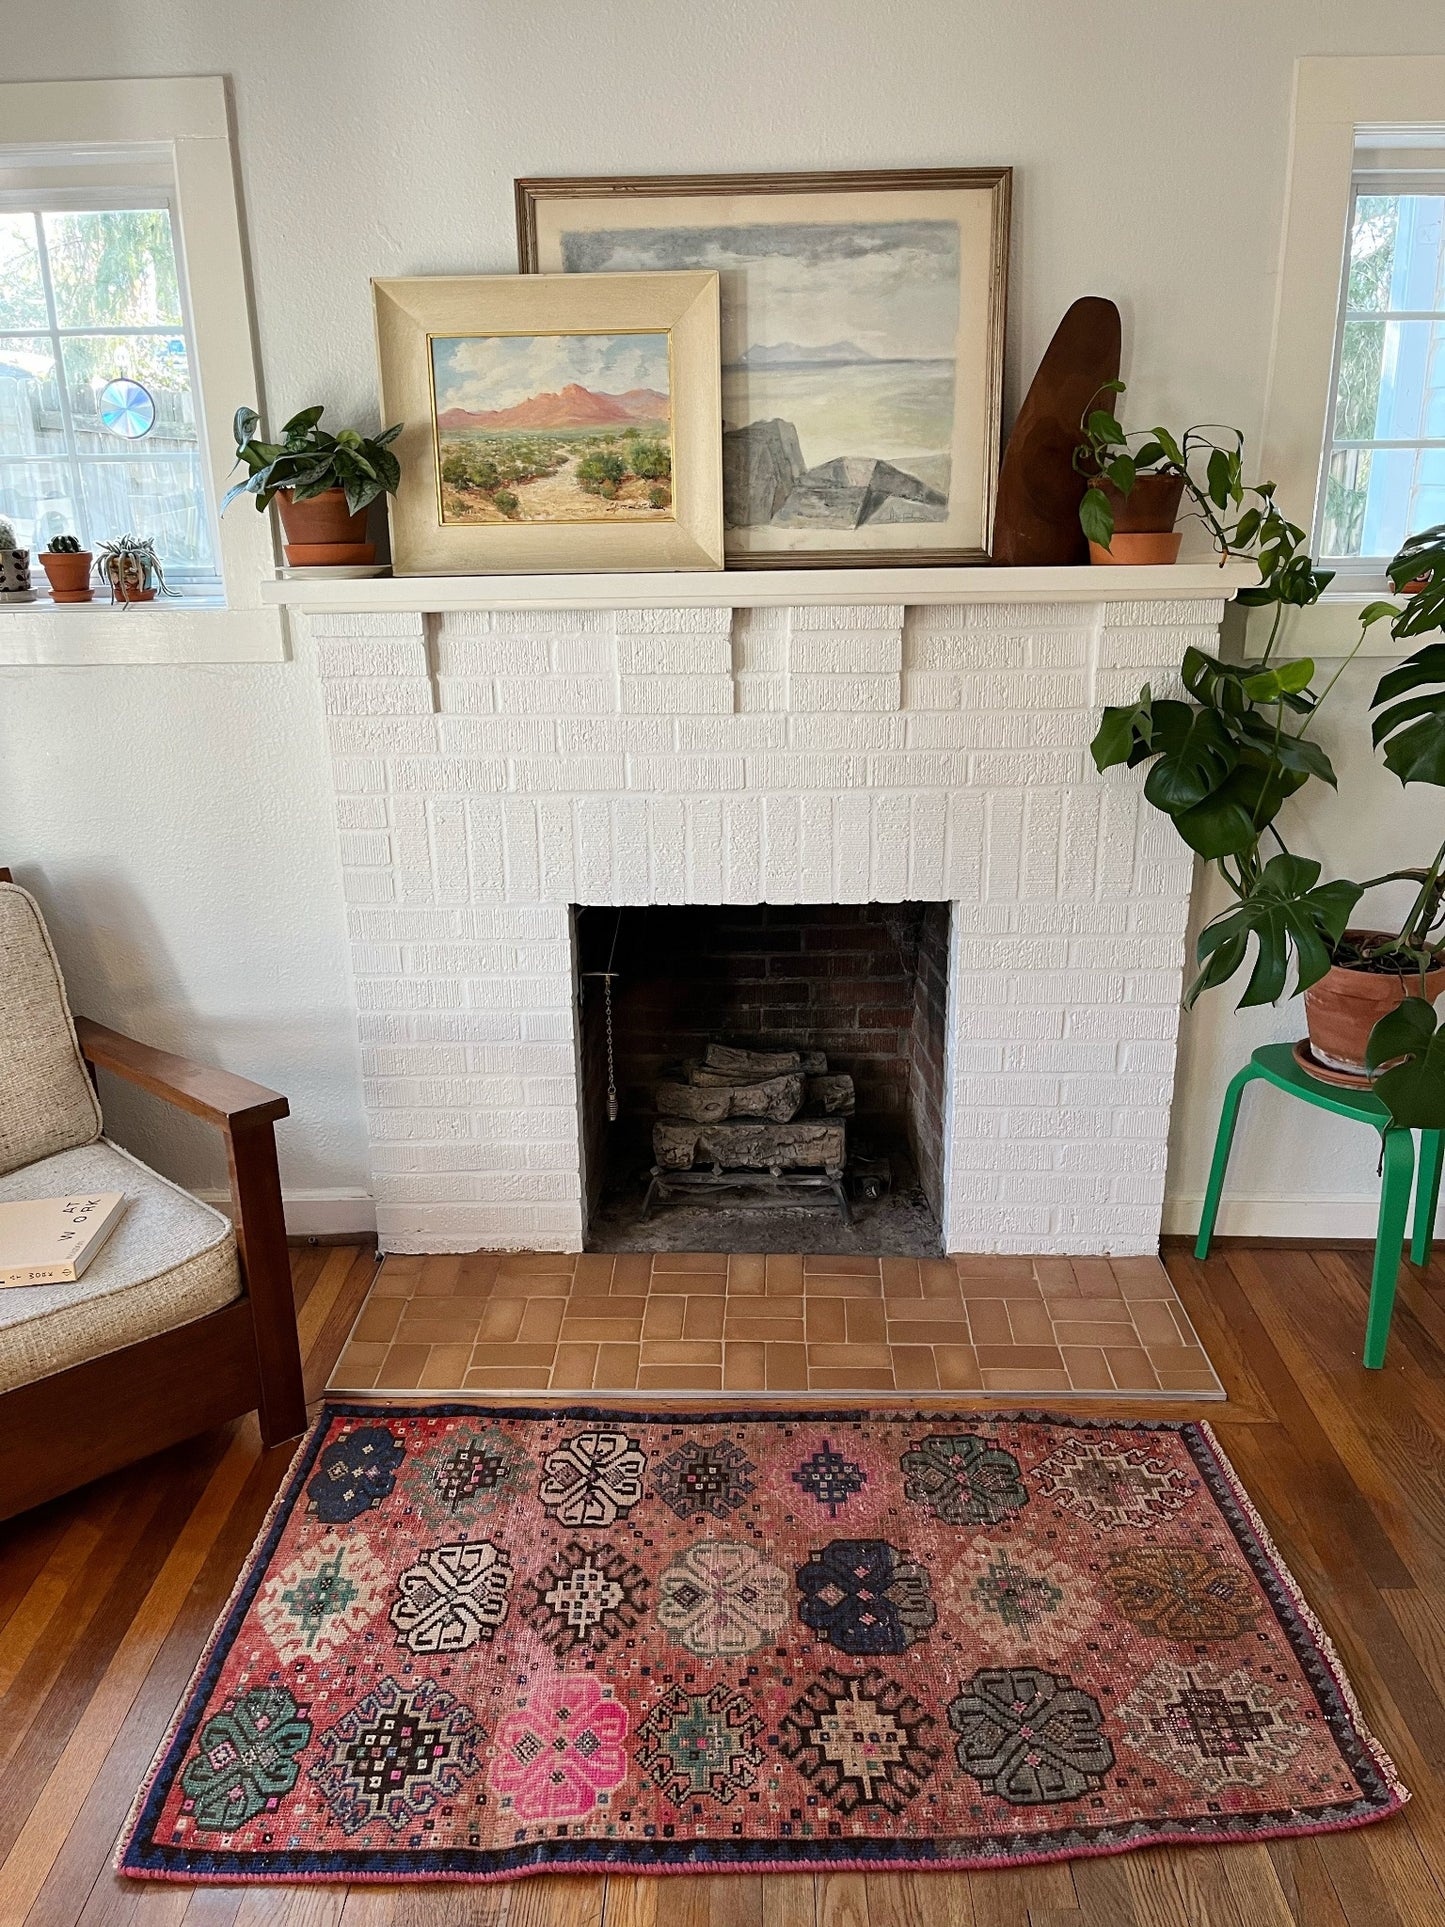 See Fiori Persian Rug Styled in front of a FIreplace